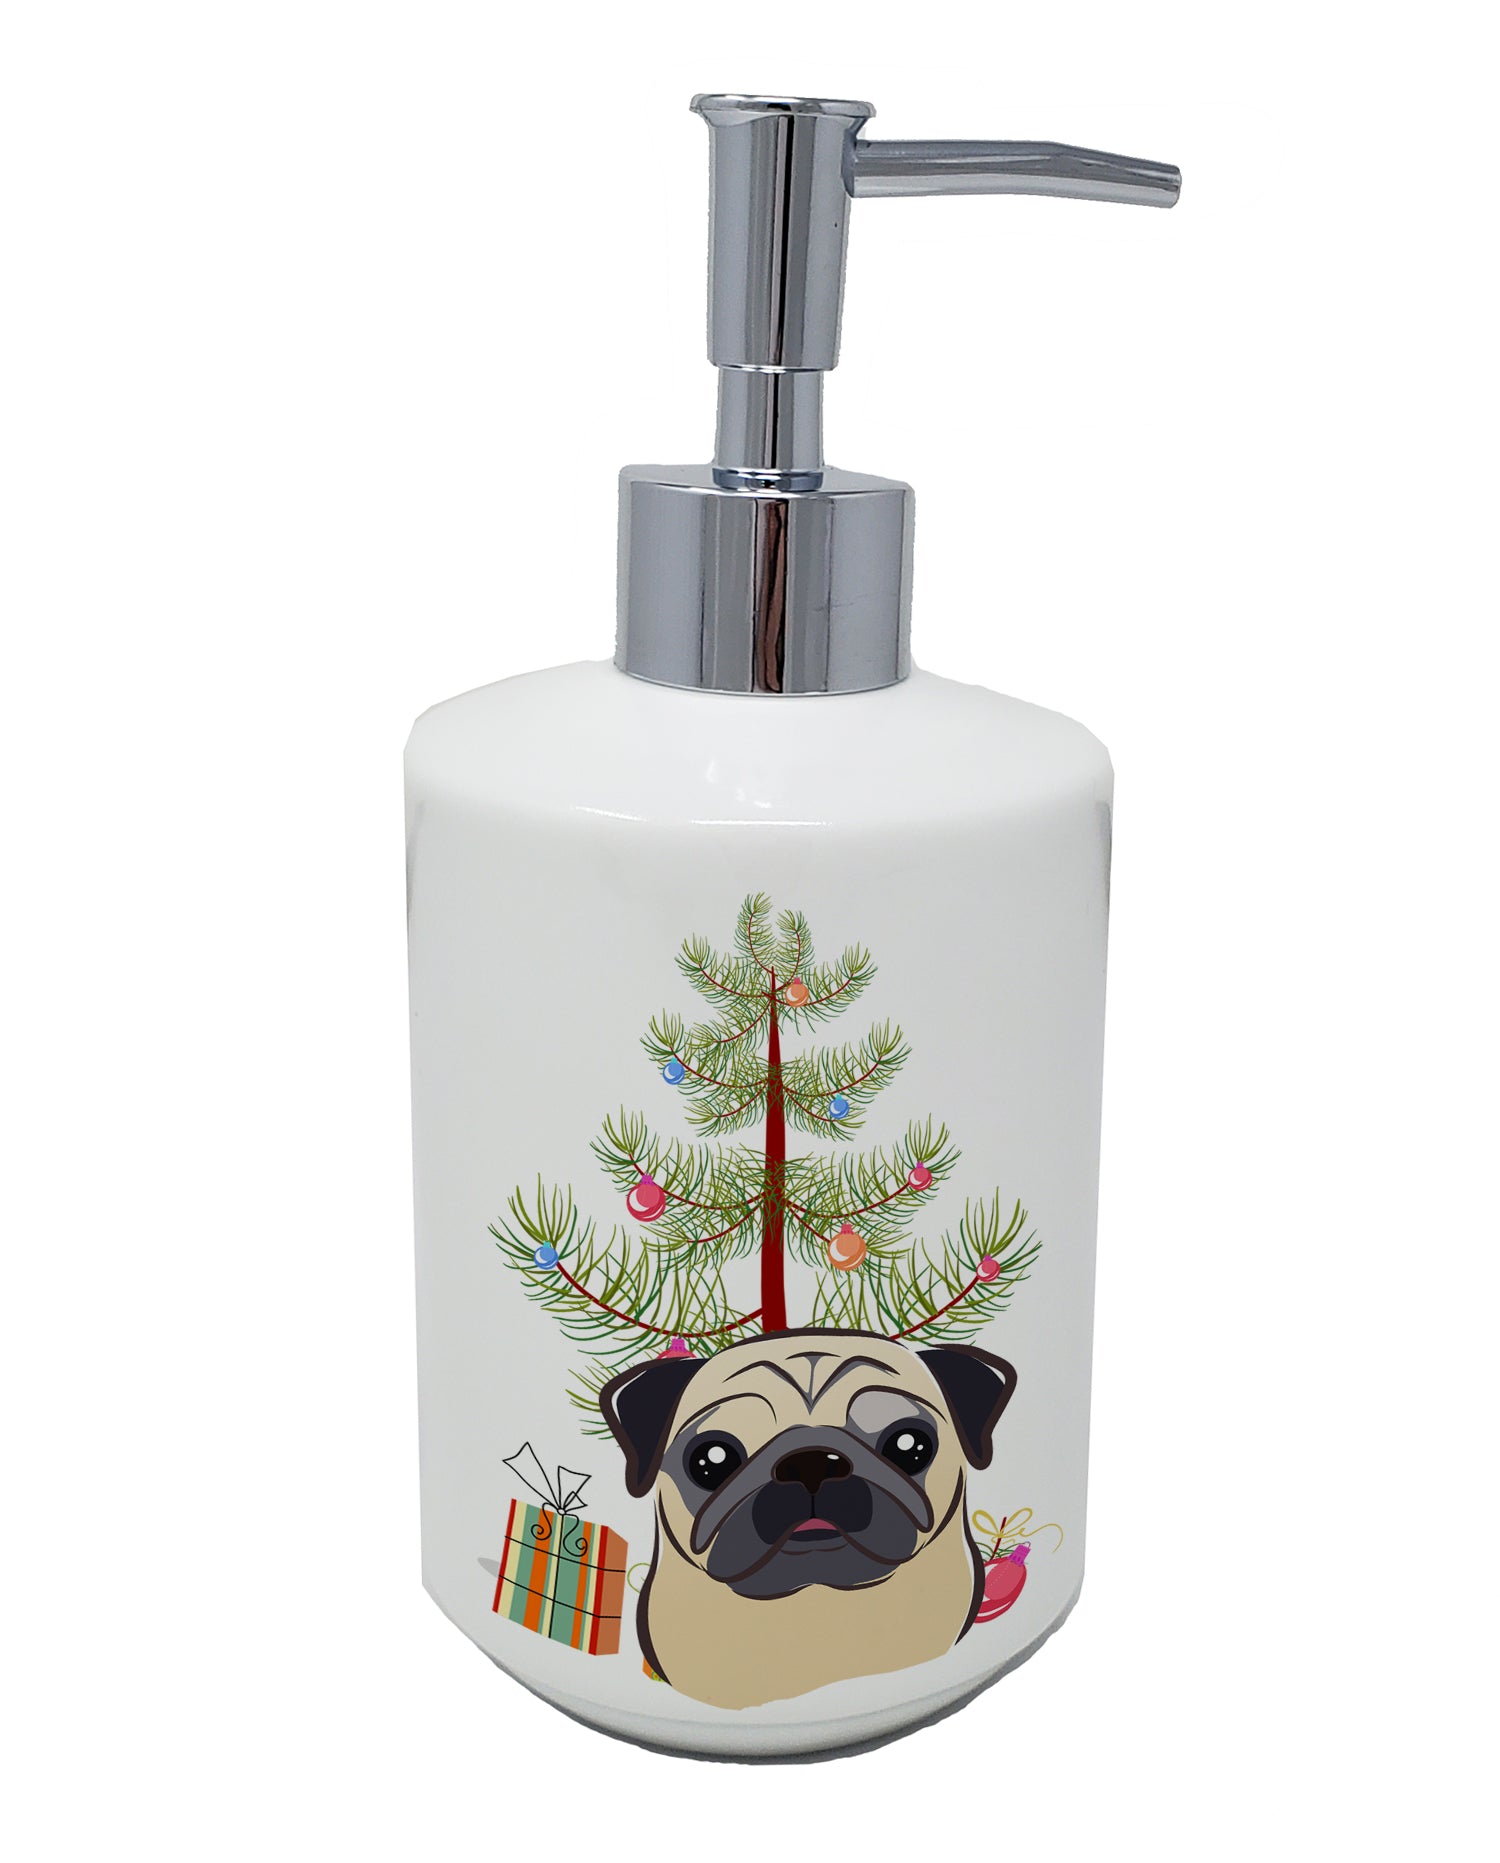 Buy this Christmas Tree and Fawn Pug Ceramic Soap Dispenser